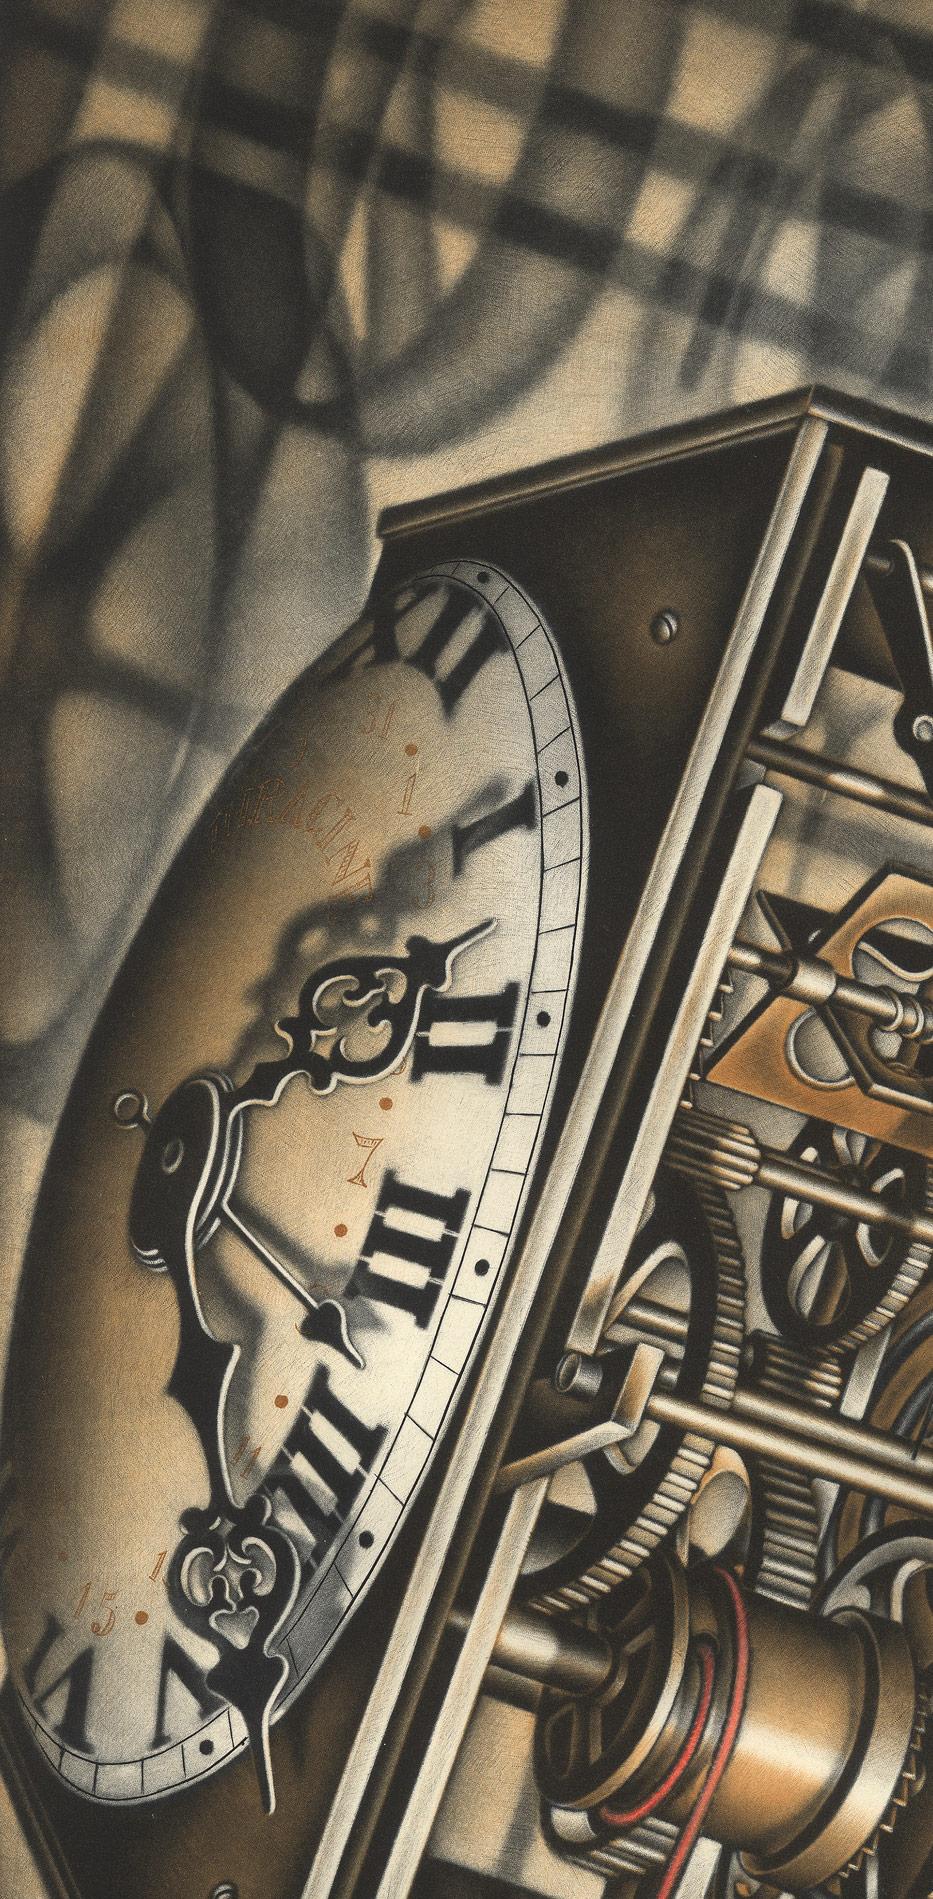 Time Lines (Clock that contrasts delicate hands with stark form of its casing) - American Modern Print by Carol Wax